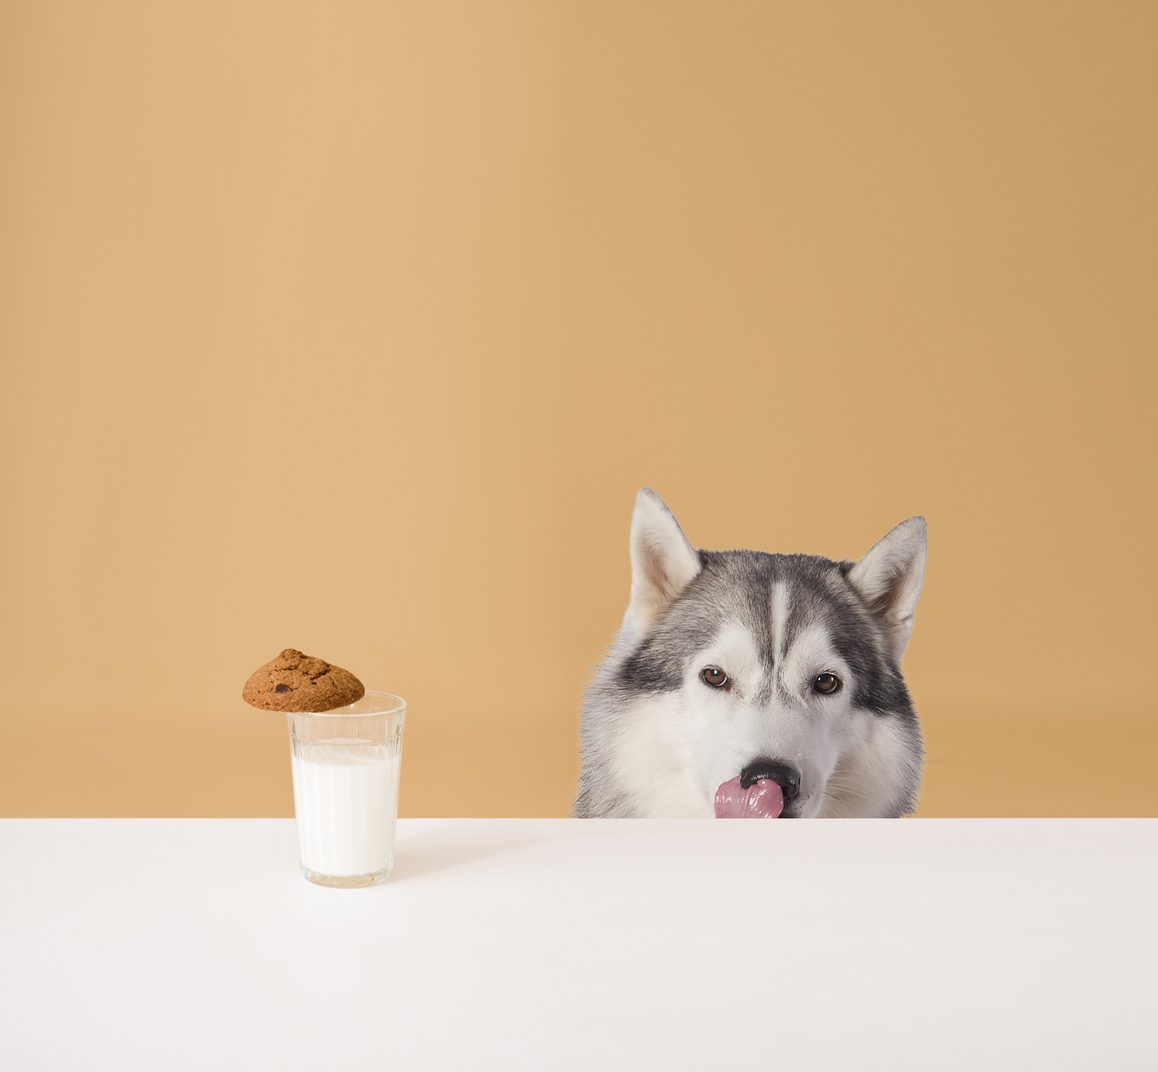 World milk day 2021: there is a glass of milk on the table with cookies on it. Husky sits nearby, looks at a glass and licks its lips